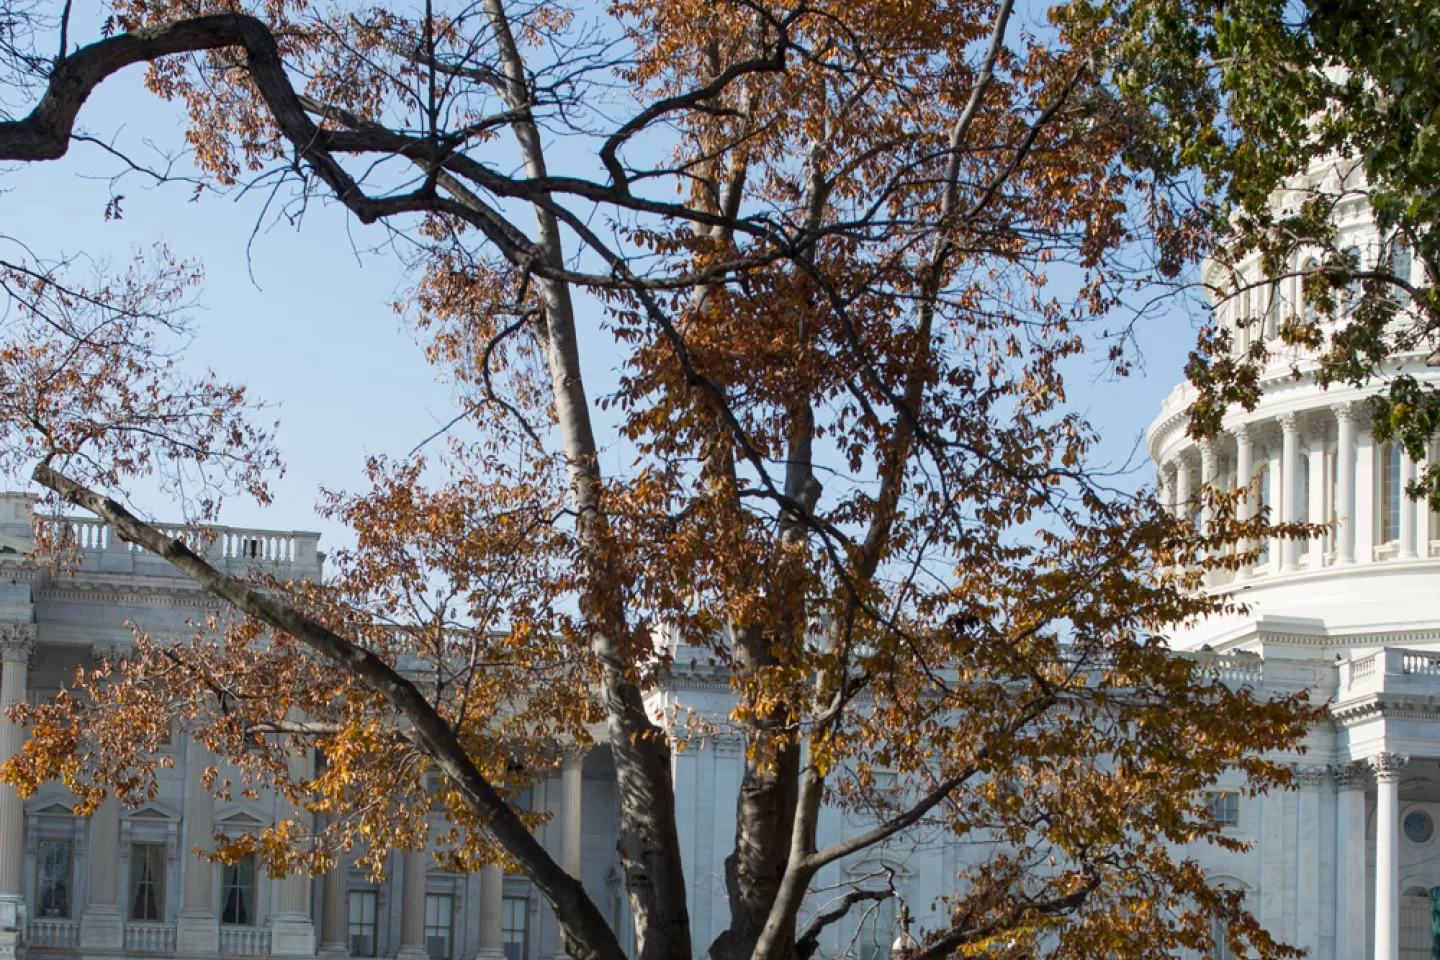 The Rep. Joseph Walsh tree on the U.S. Capitol Grounds during fall.